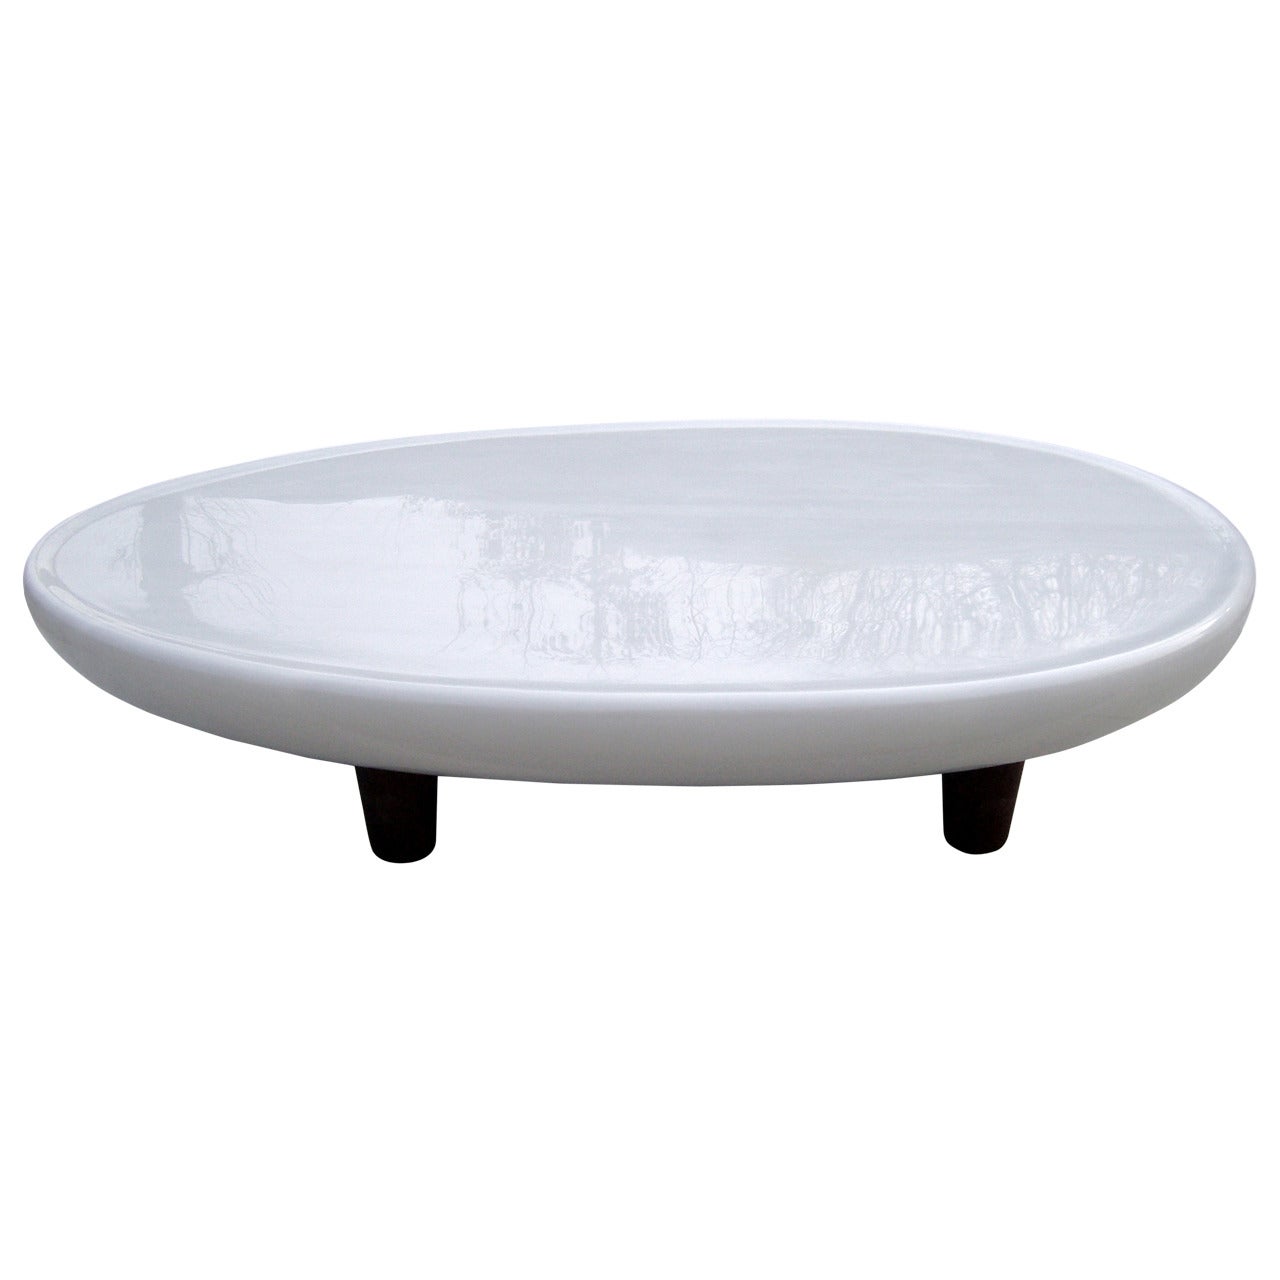 Afterimage 09-313 Indoor or Outdoor Marble Table by Choi Byung Hoon, 2009 For Sale